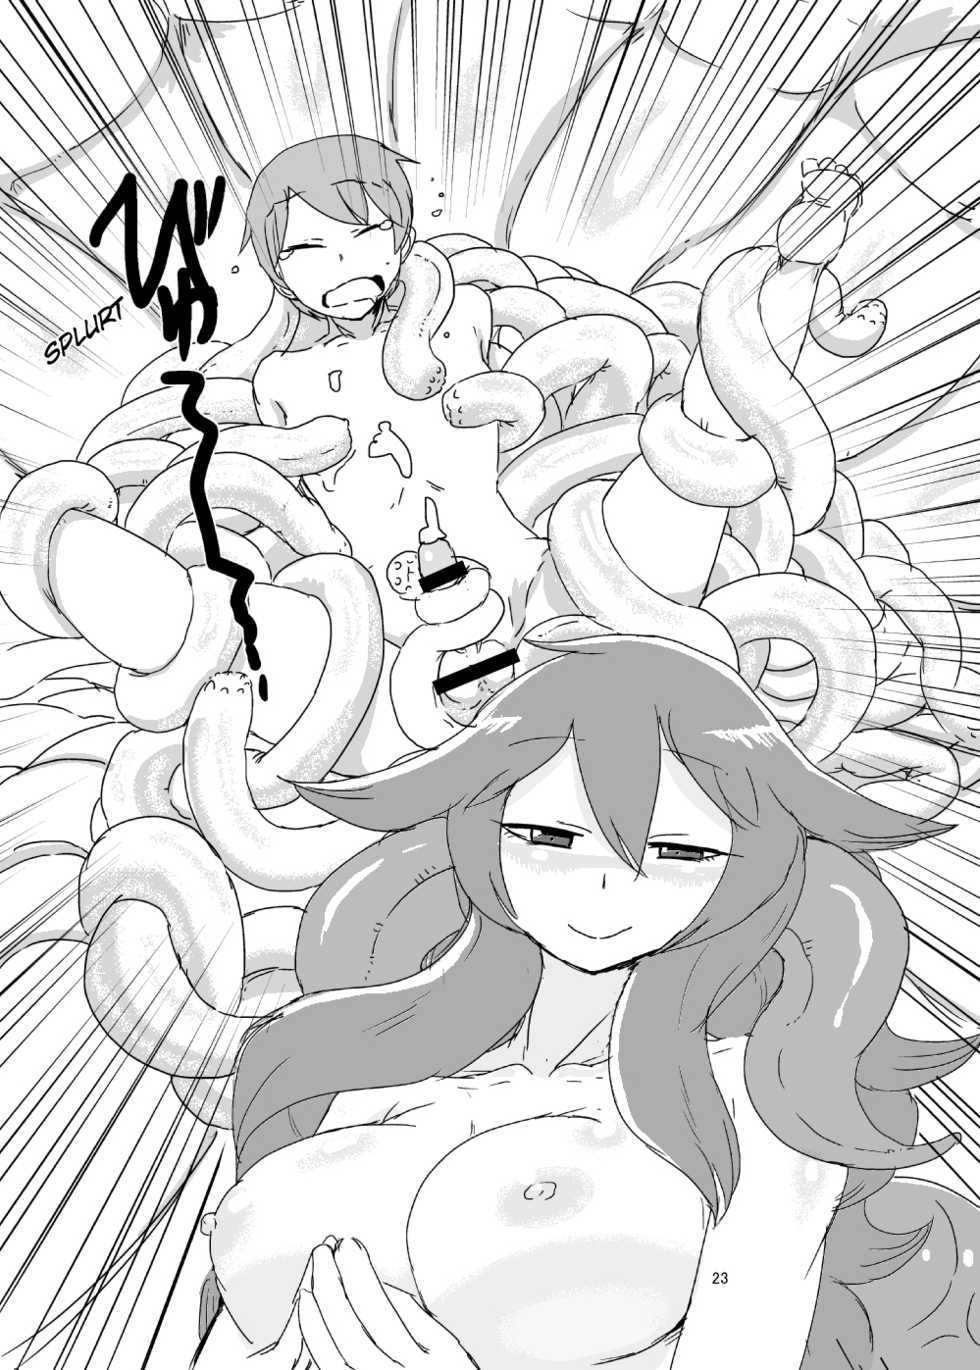 [Setouchi Pharm (Setouchi)] Mon Musu Quest! Beyond The End 2 (Monster Girl Quest!) [Russian] [﻿stycler94] [Digital] - Page 22